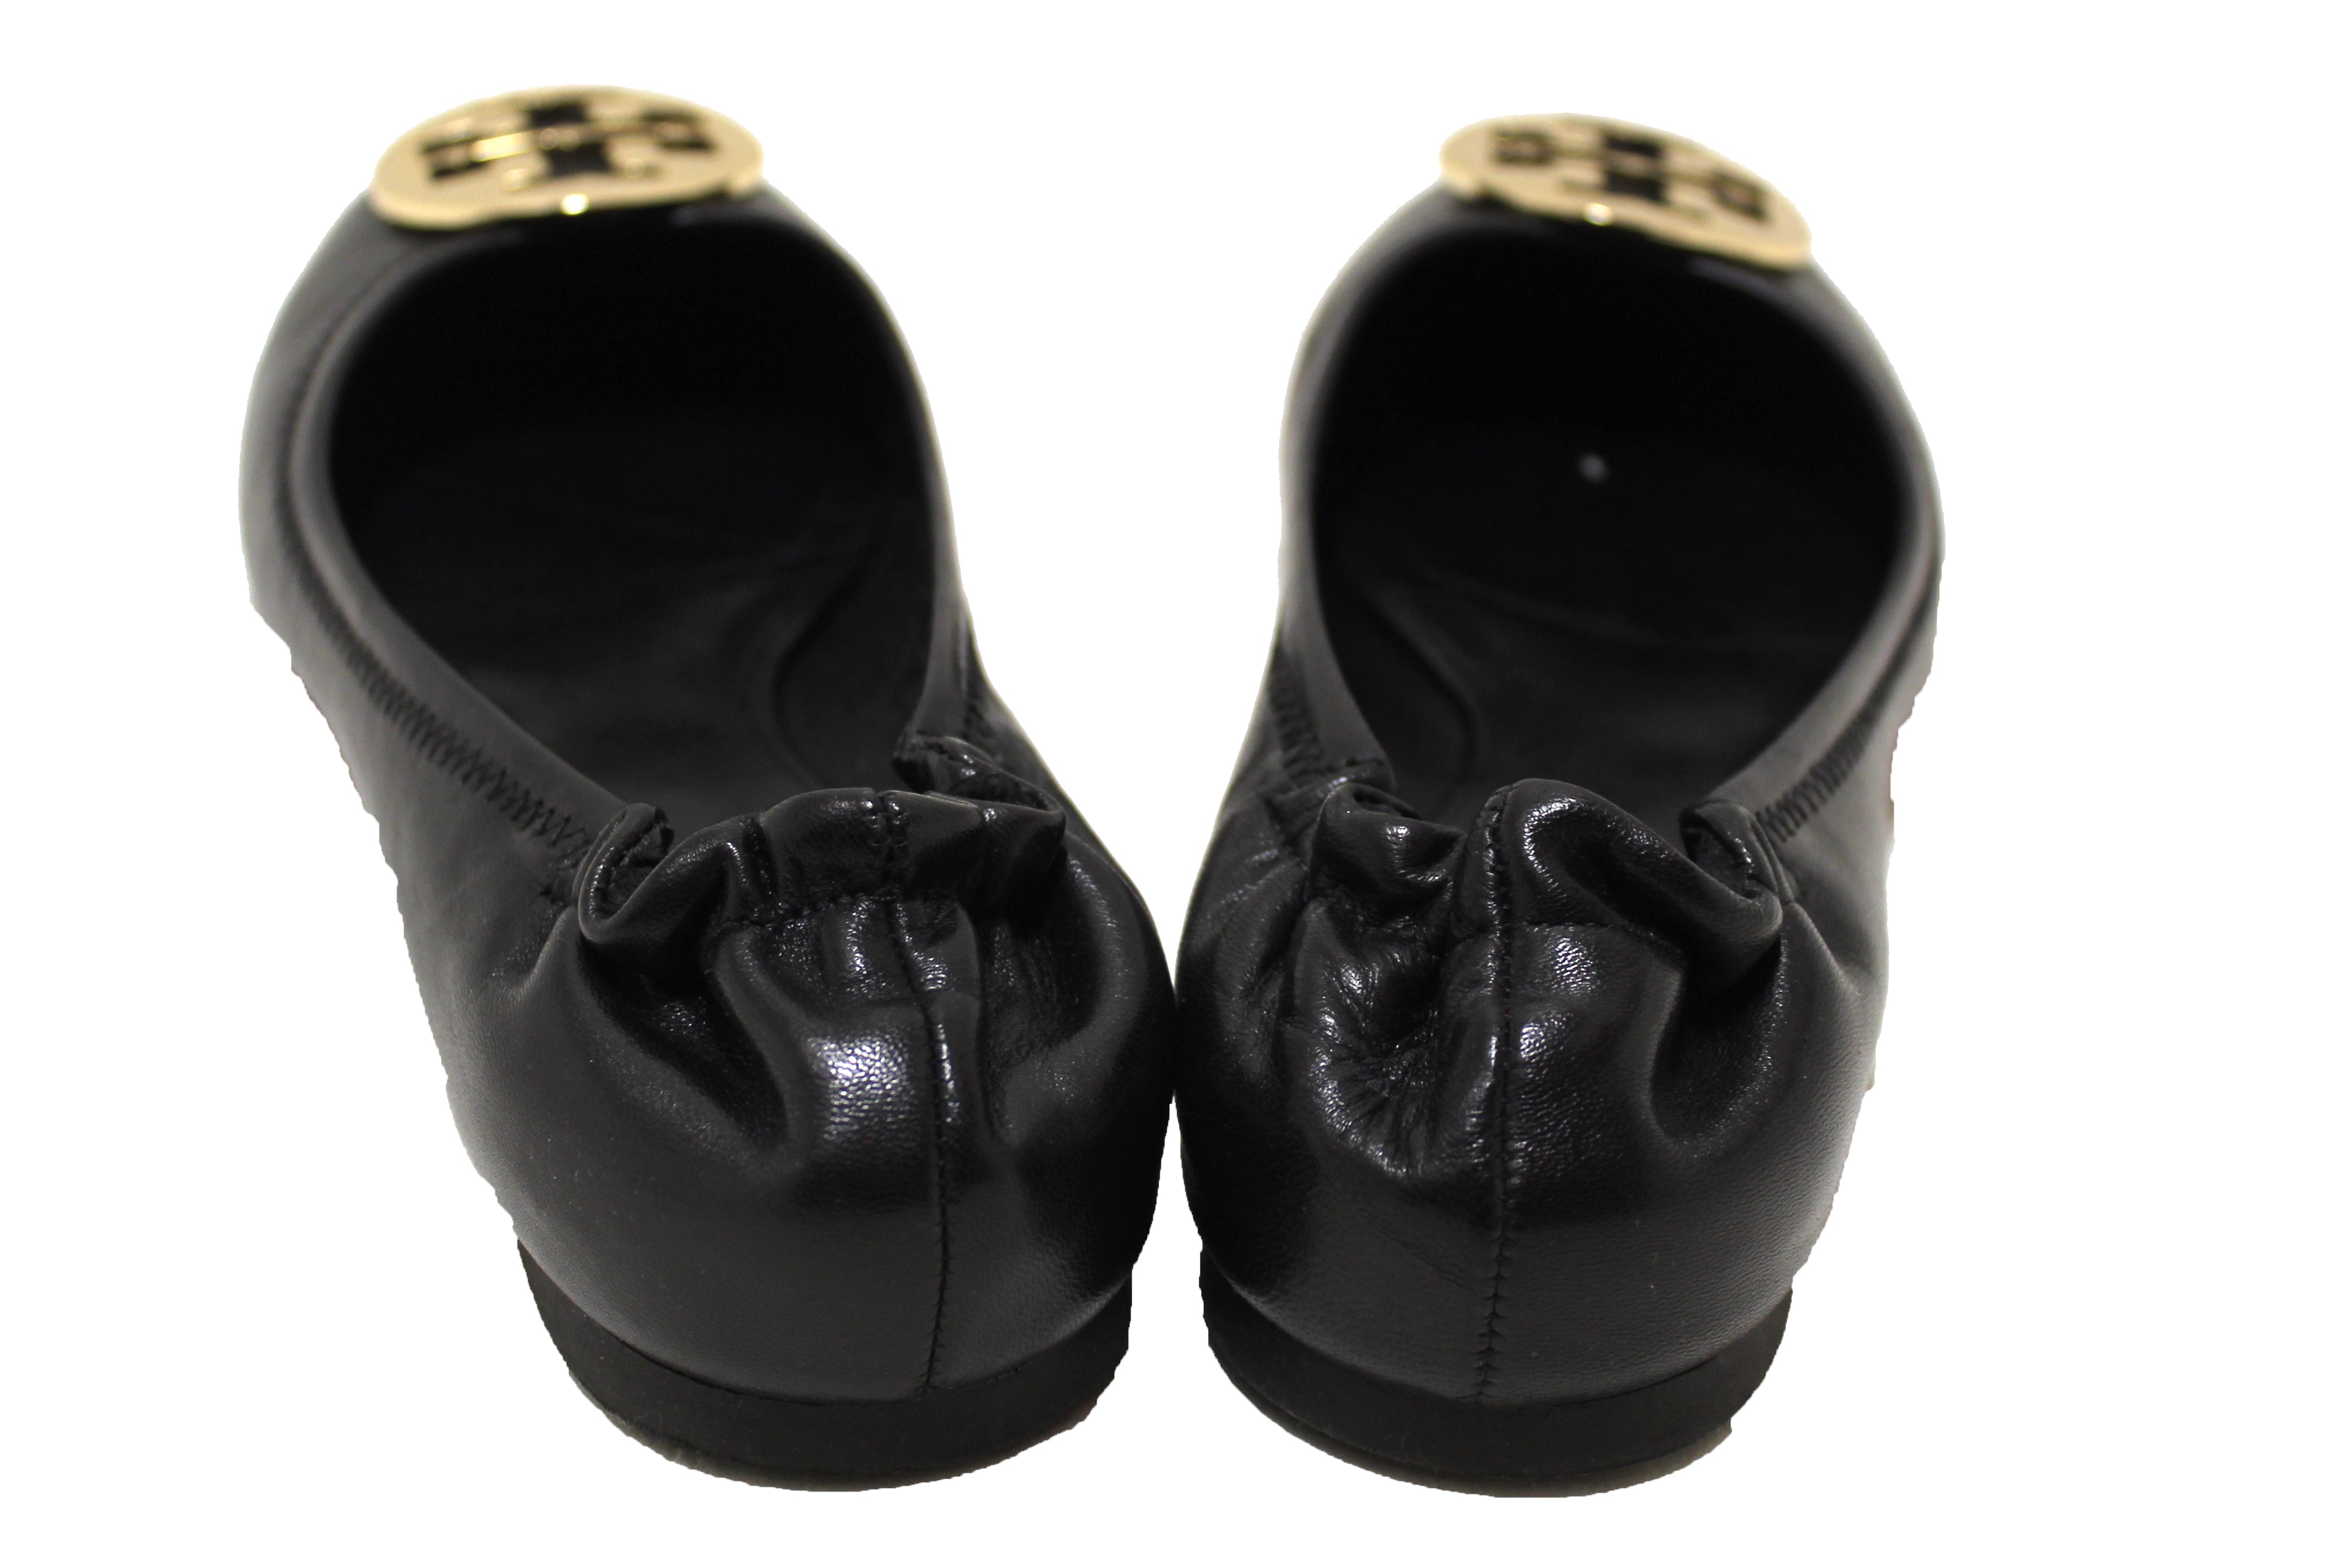 Authentic Tory Burch Black Leather Ballet Flat Shoes Size 8.5